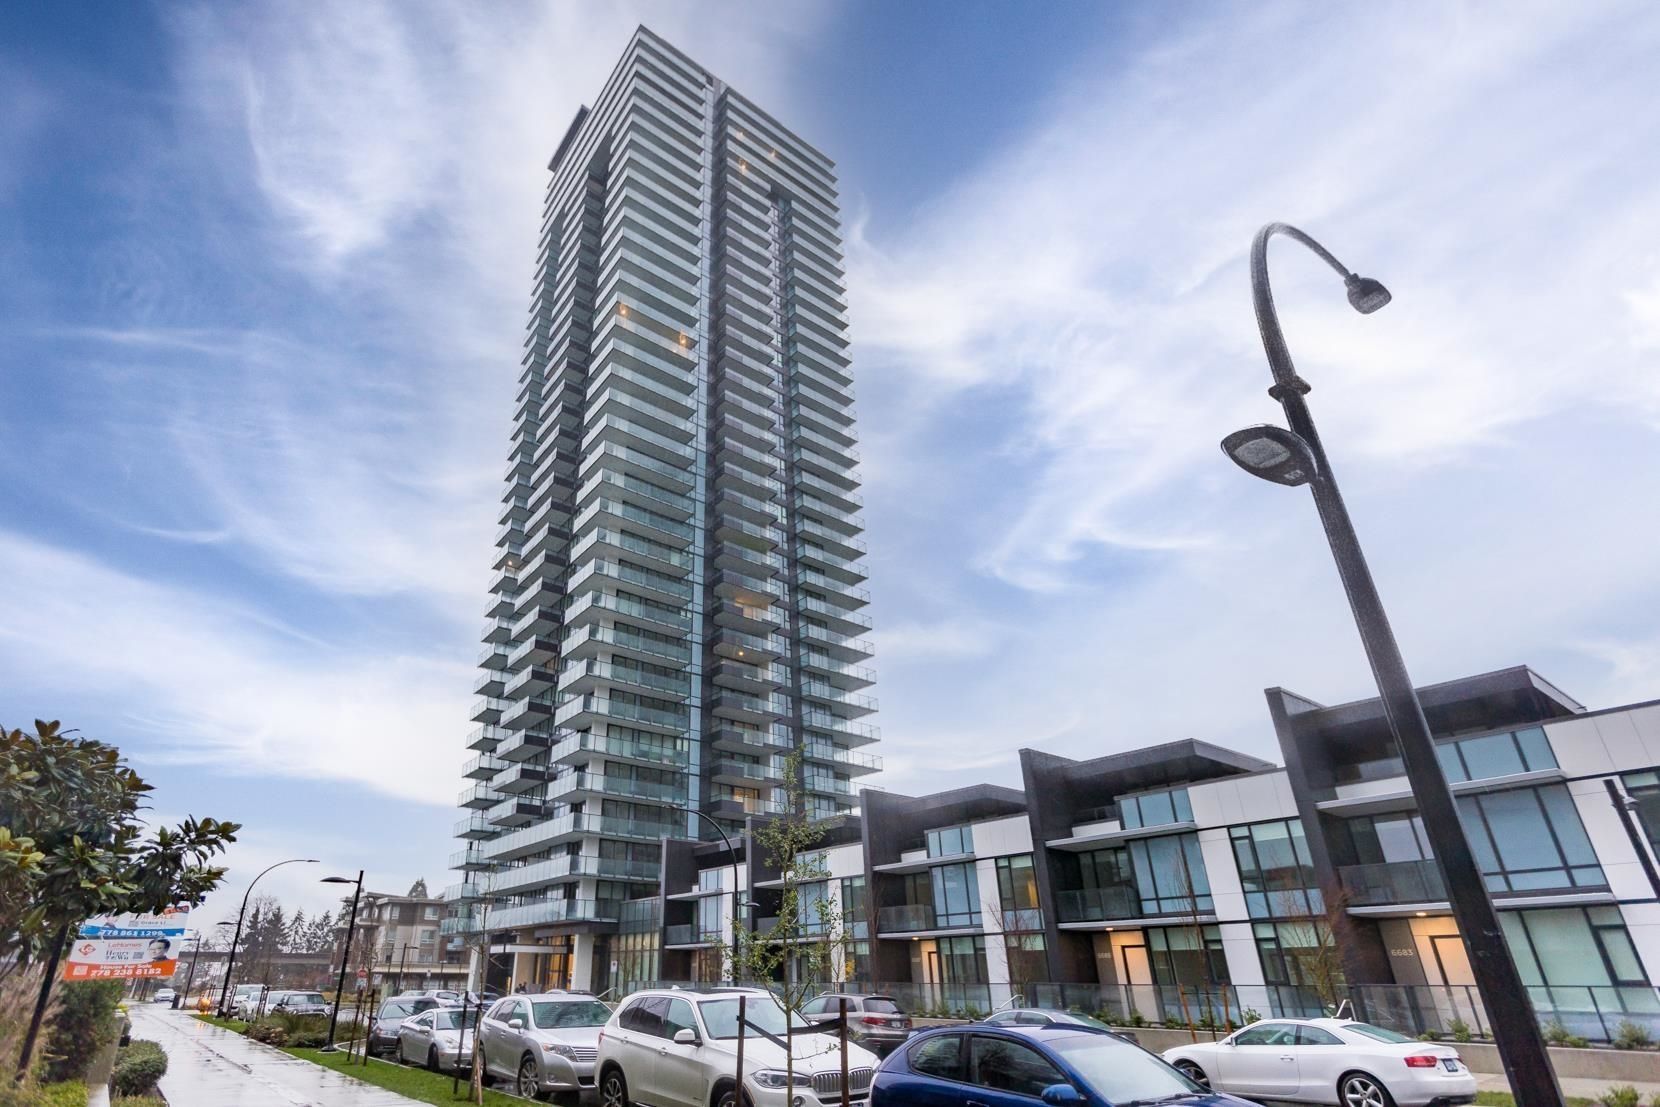 Main Photo: 2108 6699 DUNBLANE Avenue in Burnaby: Metrotown Condo for sale (Burnaby South)  : MLS®# R2652845